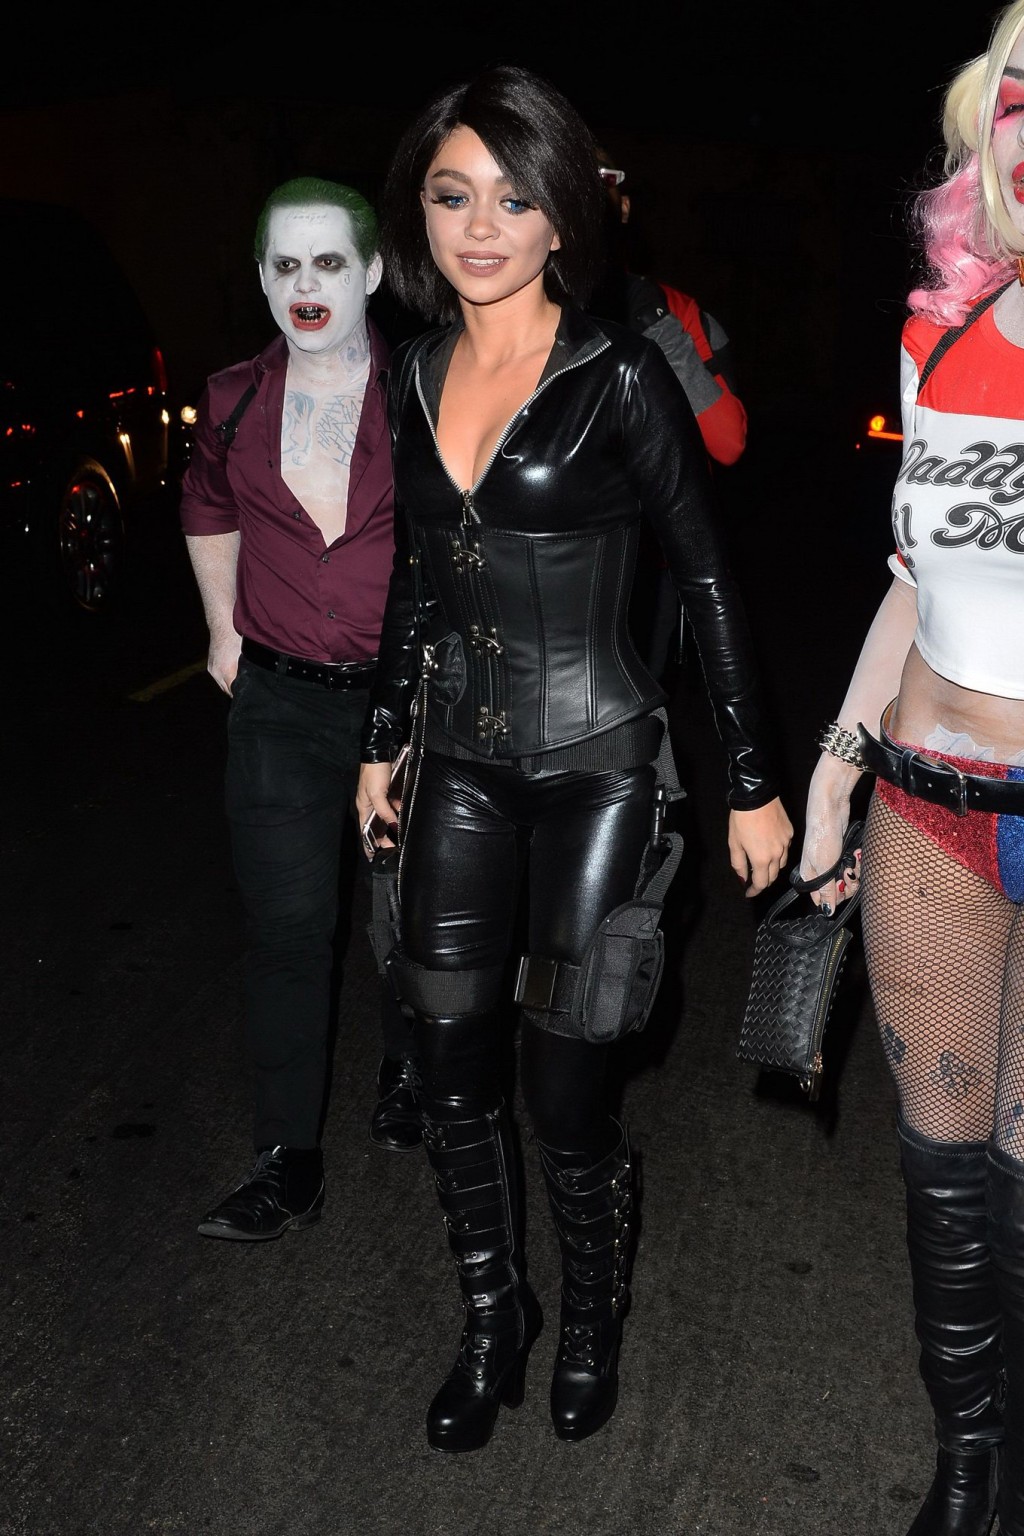 Sarah Hyland stunning in tight black leather for Halloween #75150473